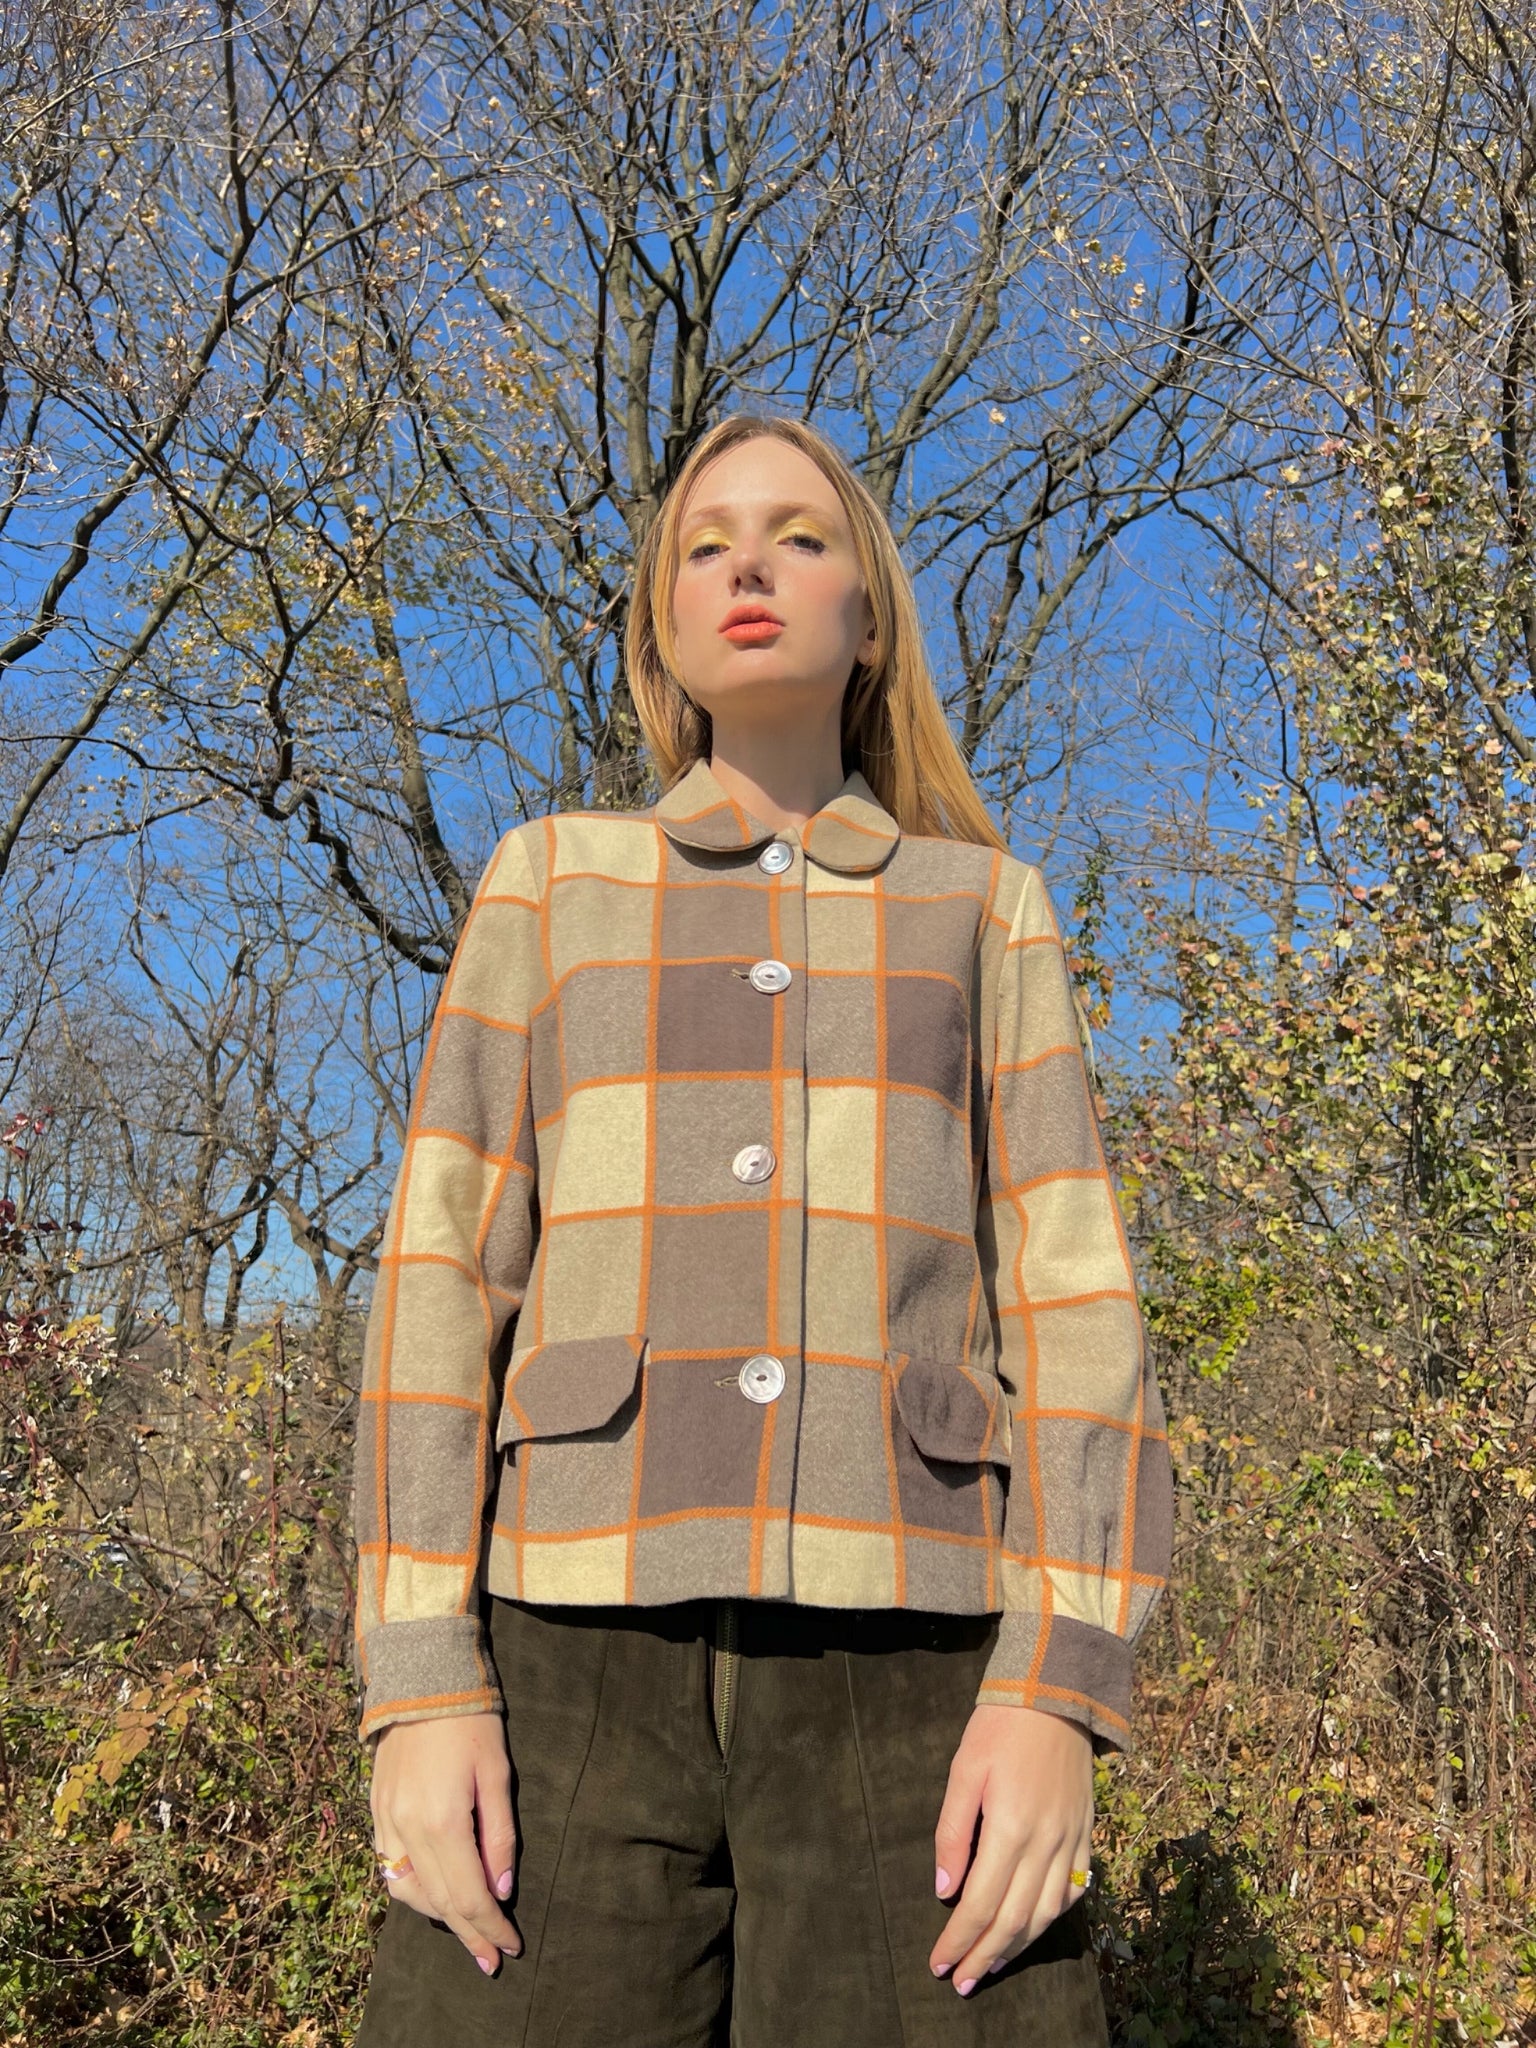 1940s/1950s Pendleton Wool Orange and Brown Plaid Cropped Coat with Pintuck Details and Peter Pan Collar